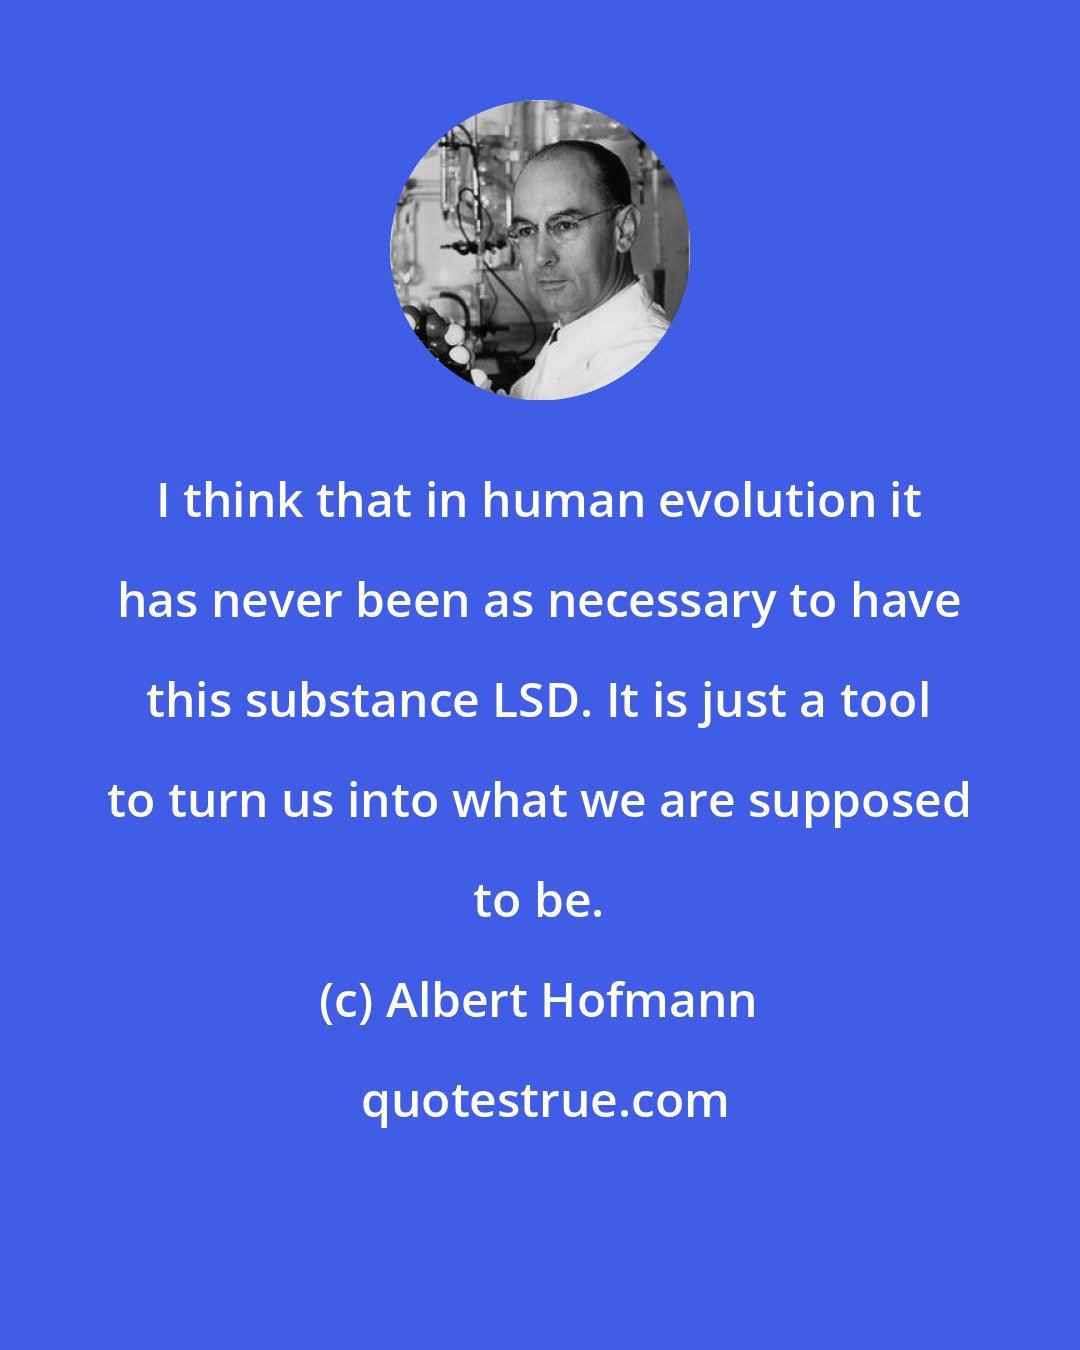 Albert Hofmann: I think that in human evolution it has never been as necessary to have this substance LSD. It is just a tool to turn us into what we are supposed to be.